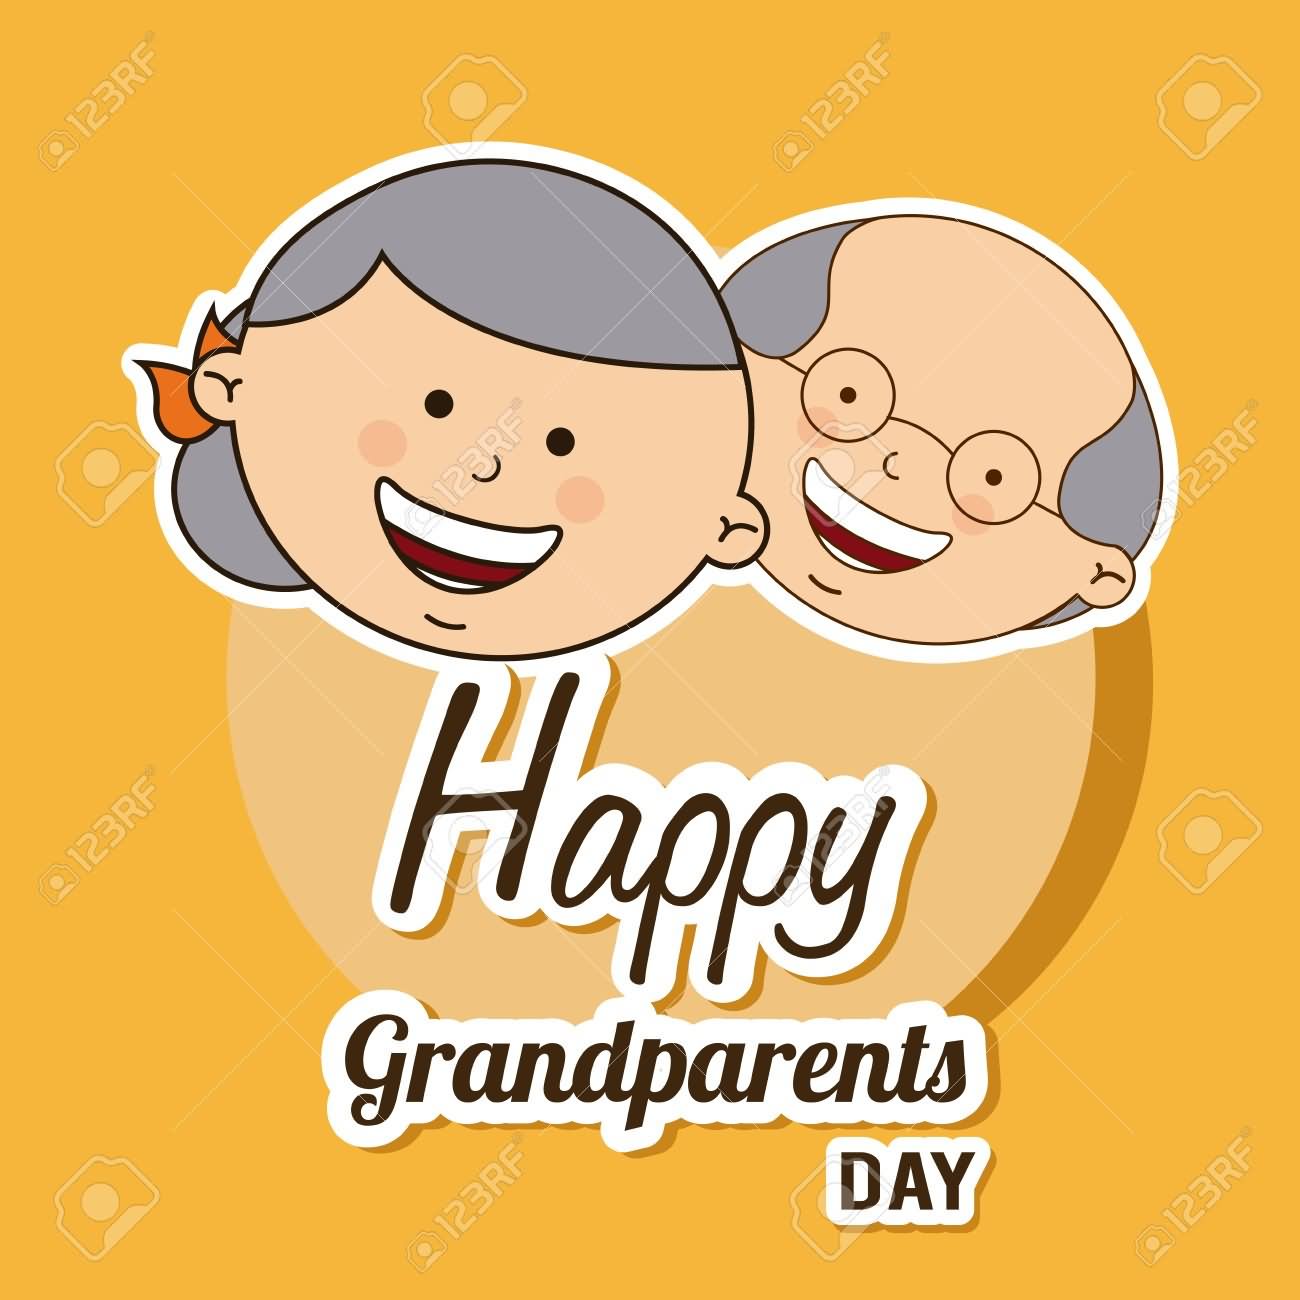 Download 40 Wonderful Grandparents Day 2016 Wishes Pictures And Images